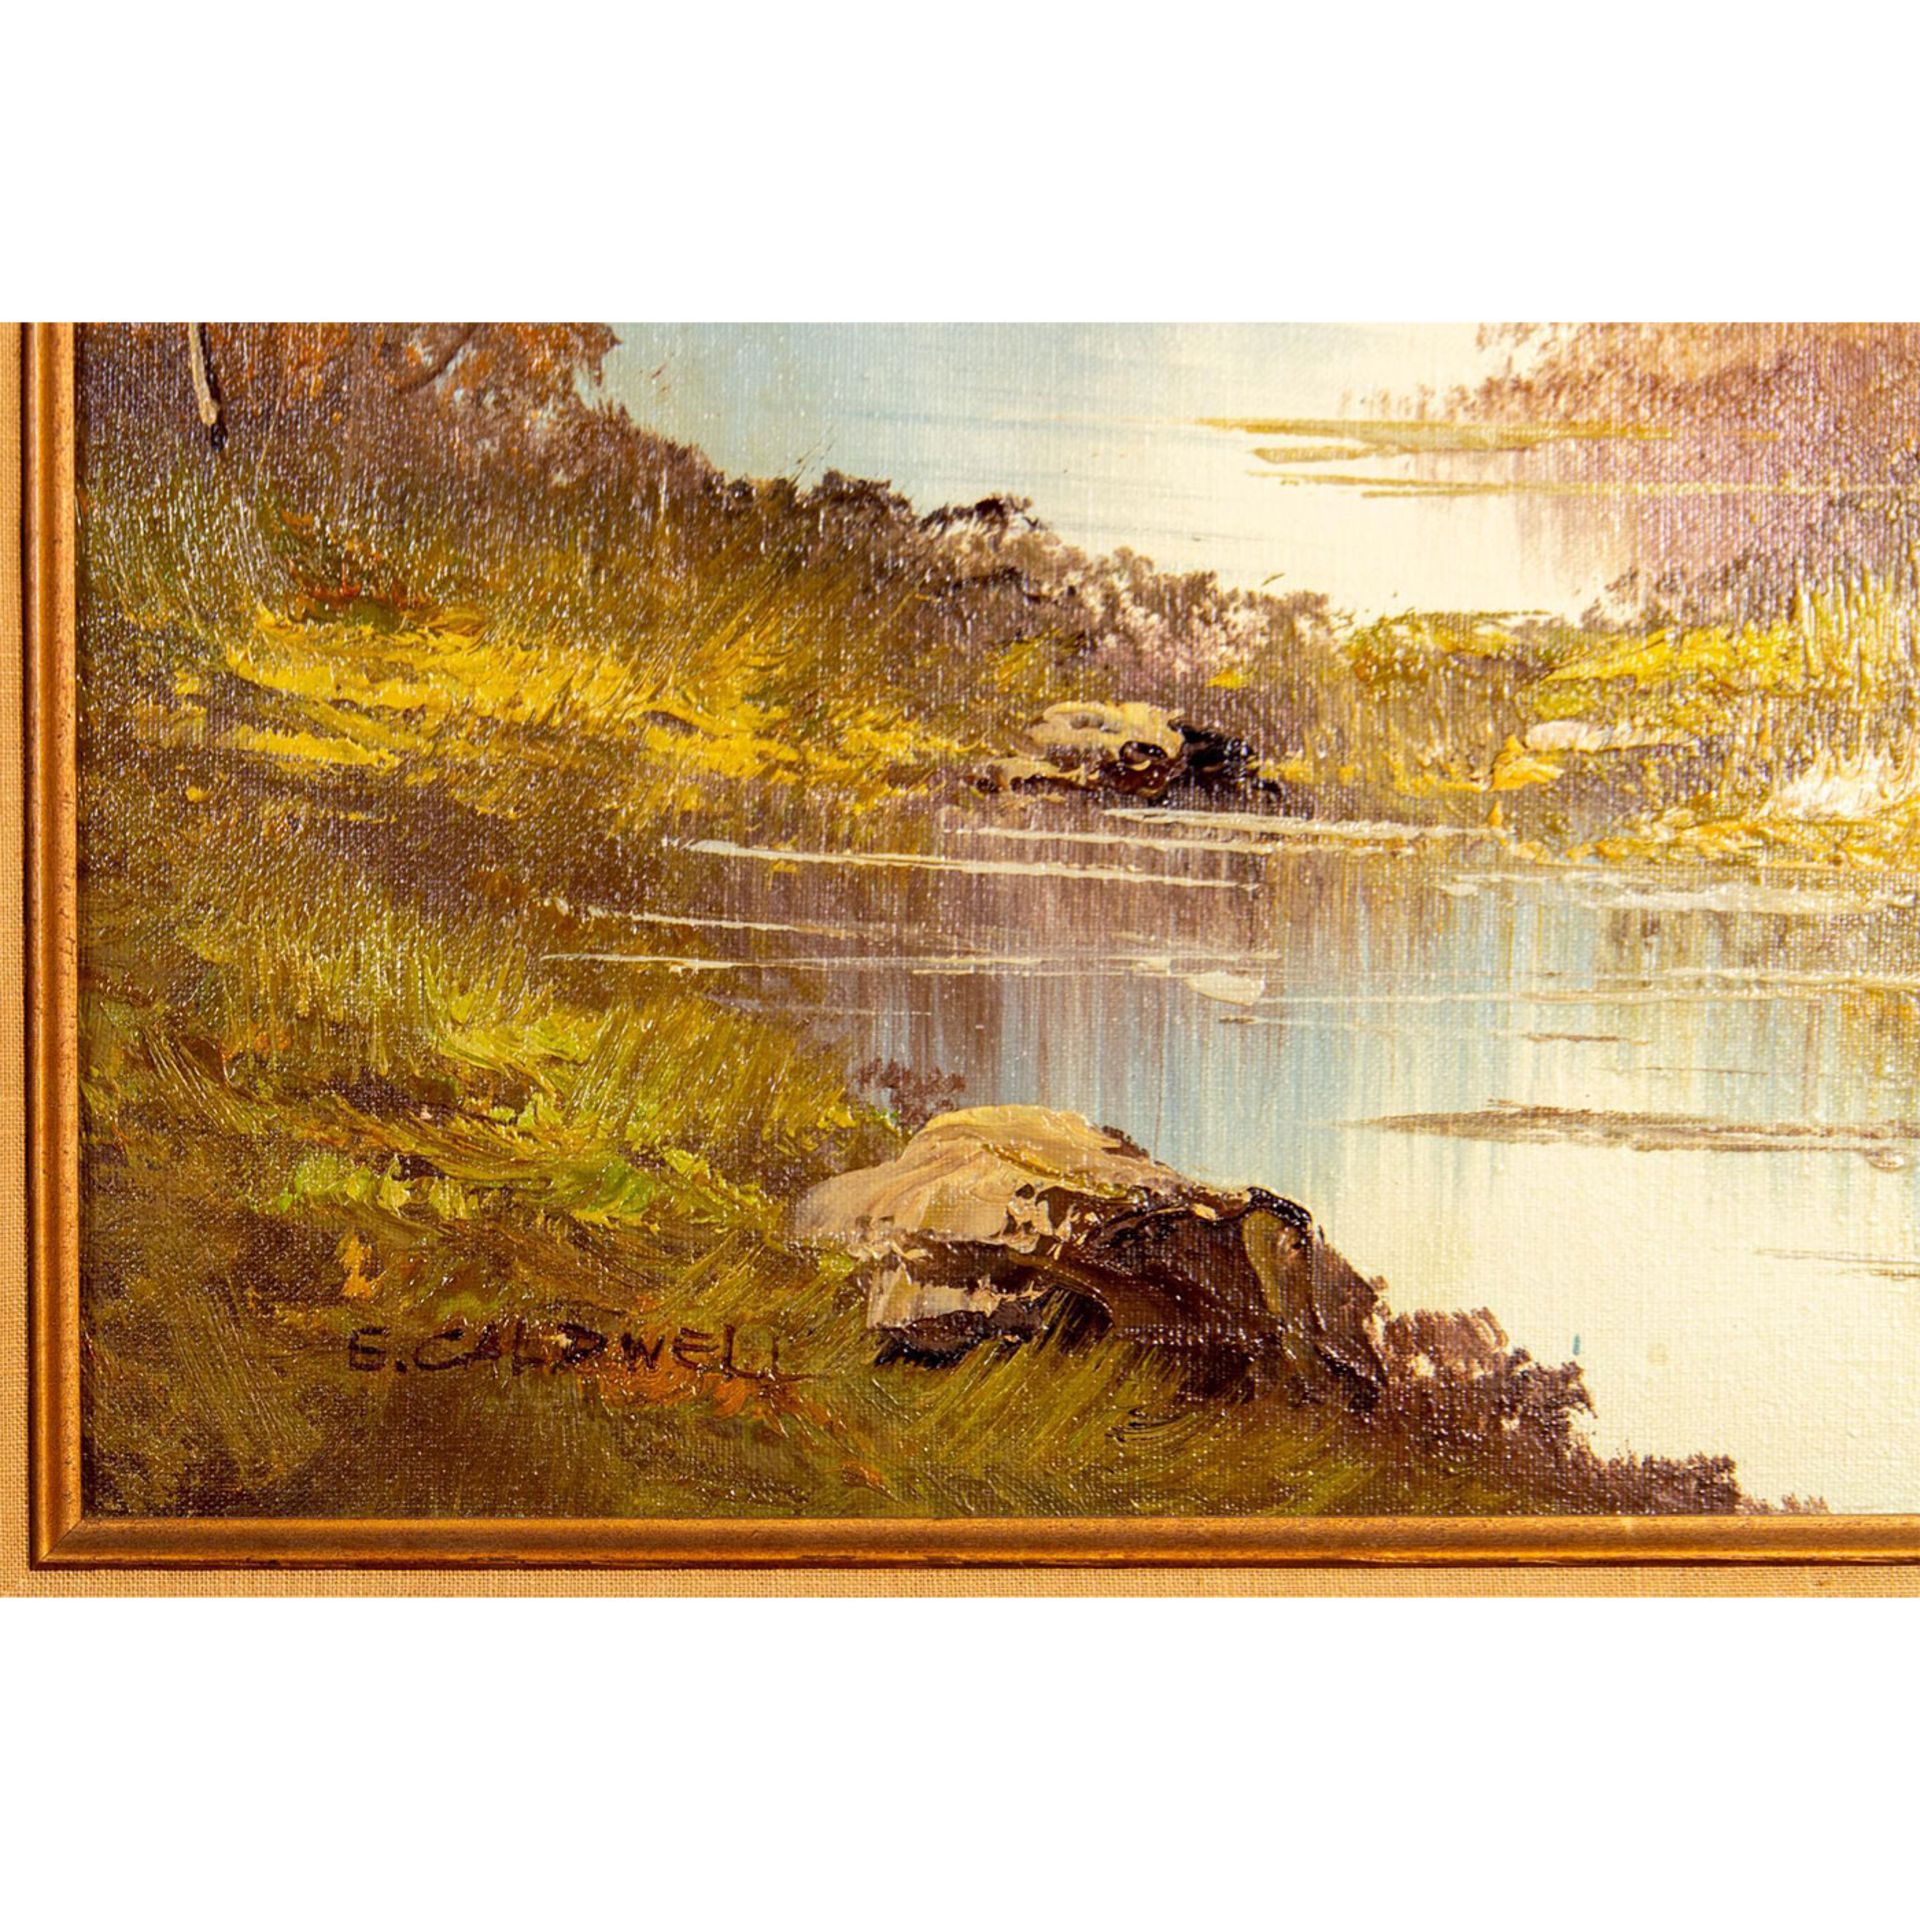 E. Caldwell, Landscape Oil Painting on Canvas, Signed - Image 4 of 5